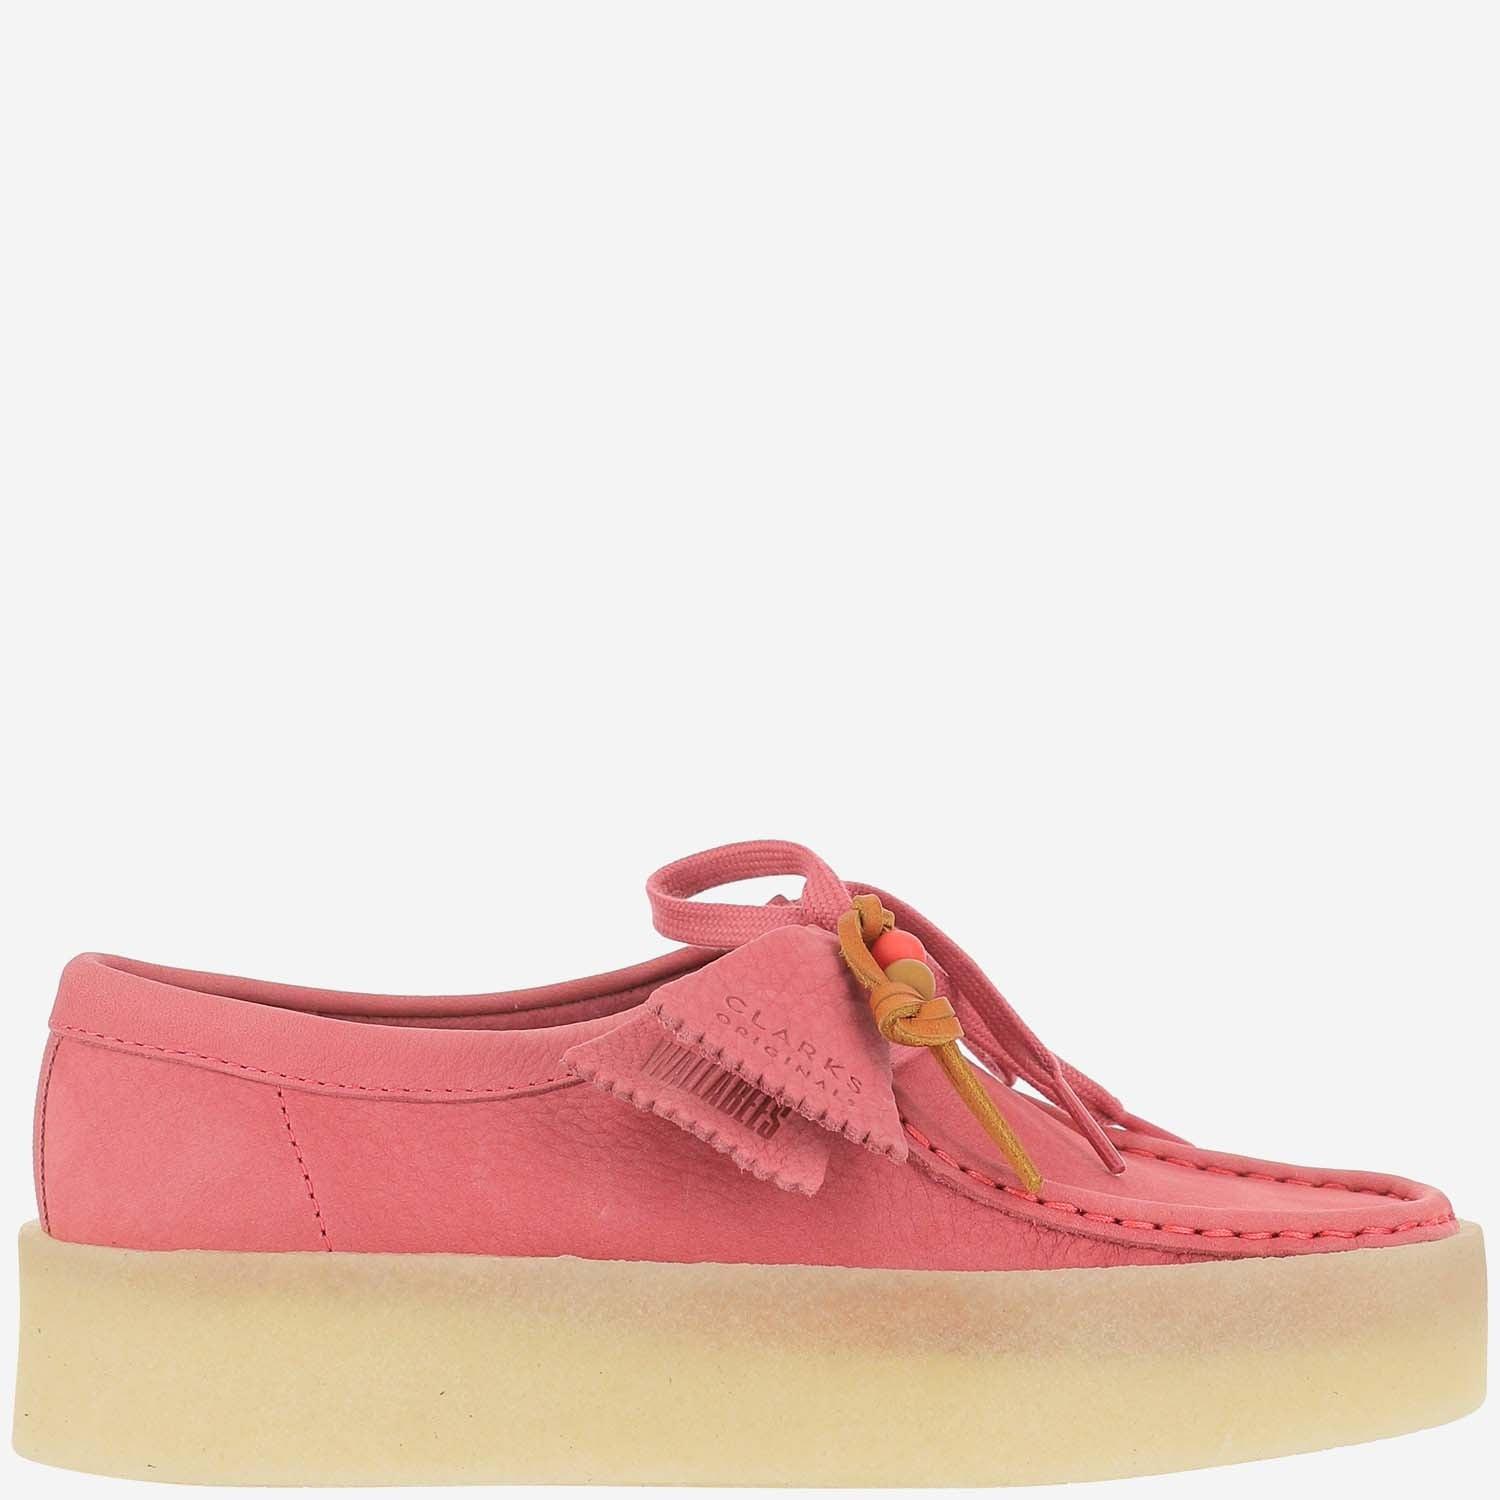 Clarks Wallacraft Lo Shoes in Red Womens Shoes Flats and flat shoes Lace Up shoes and boots 